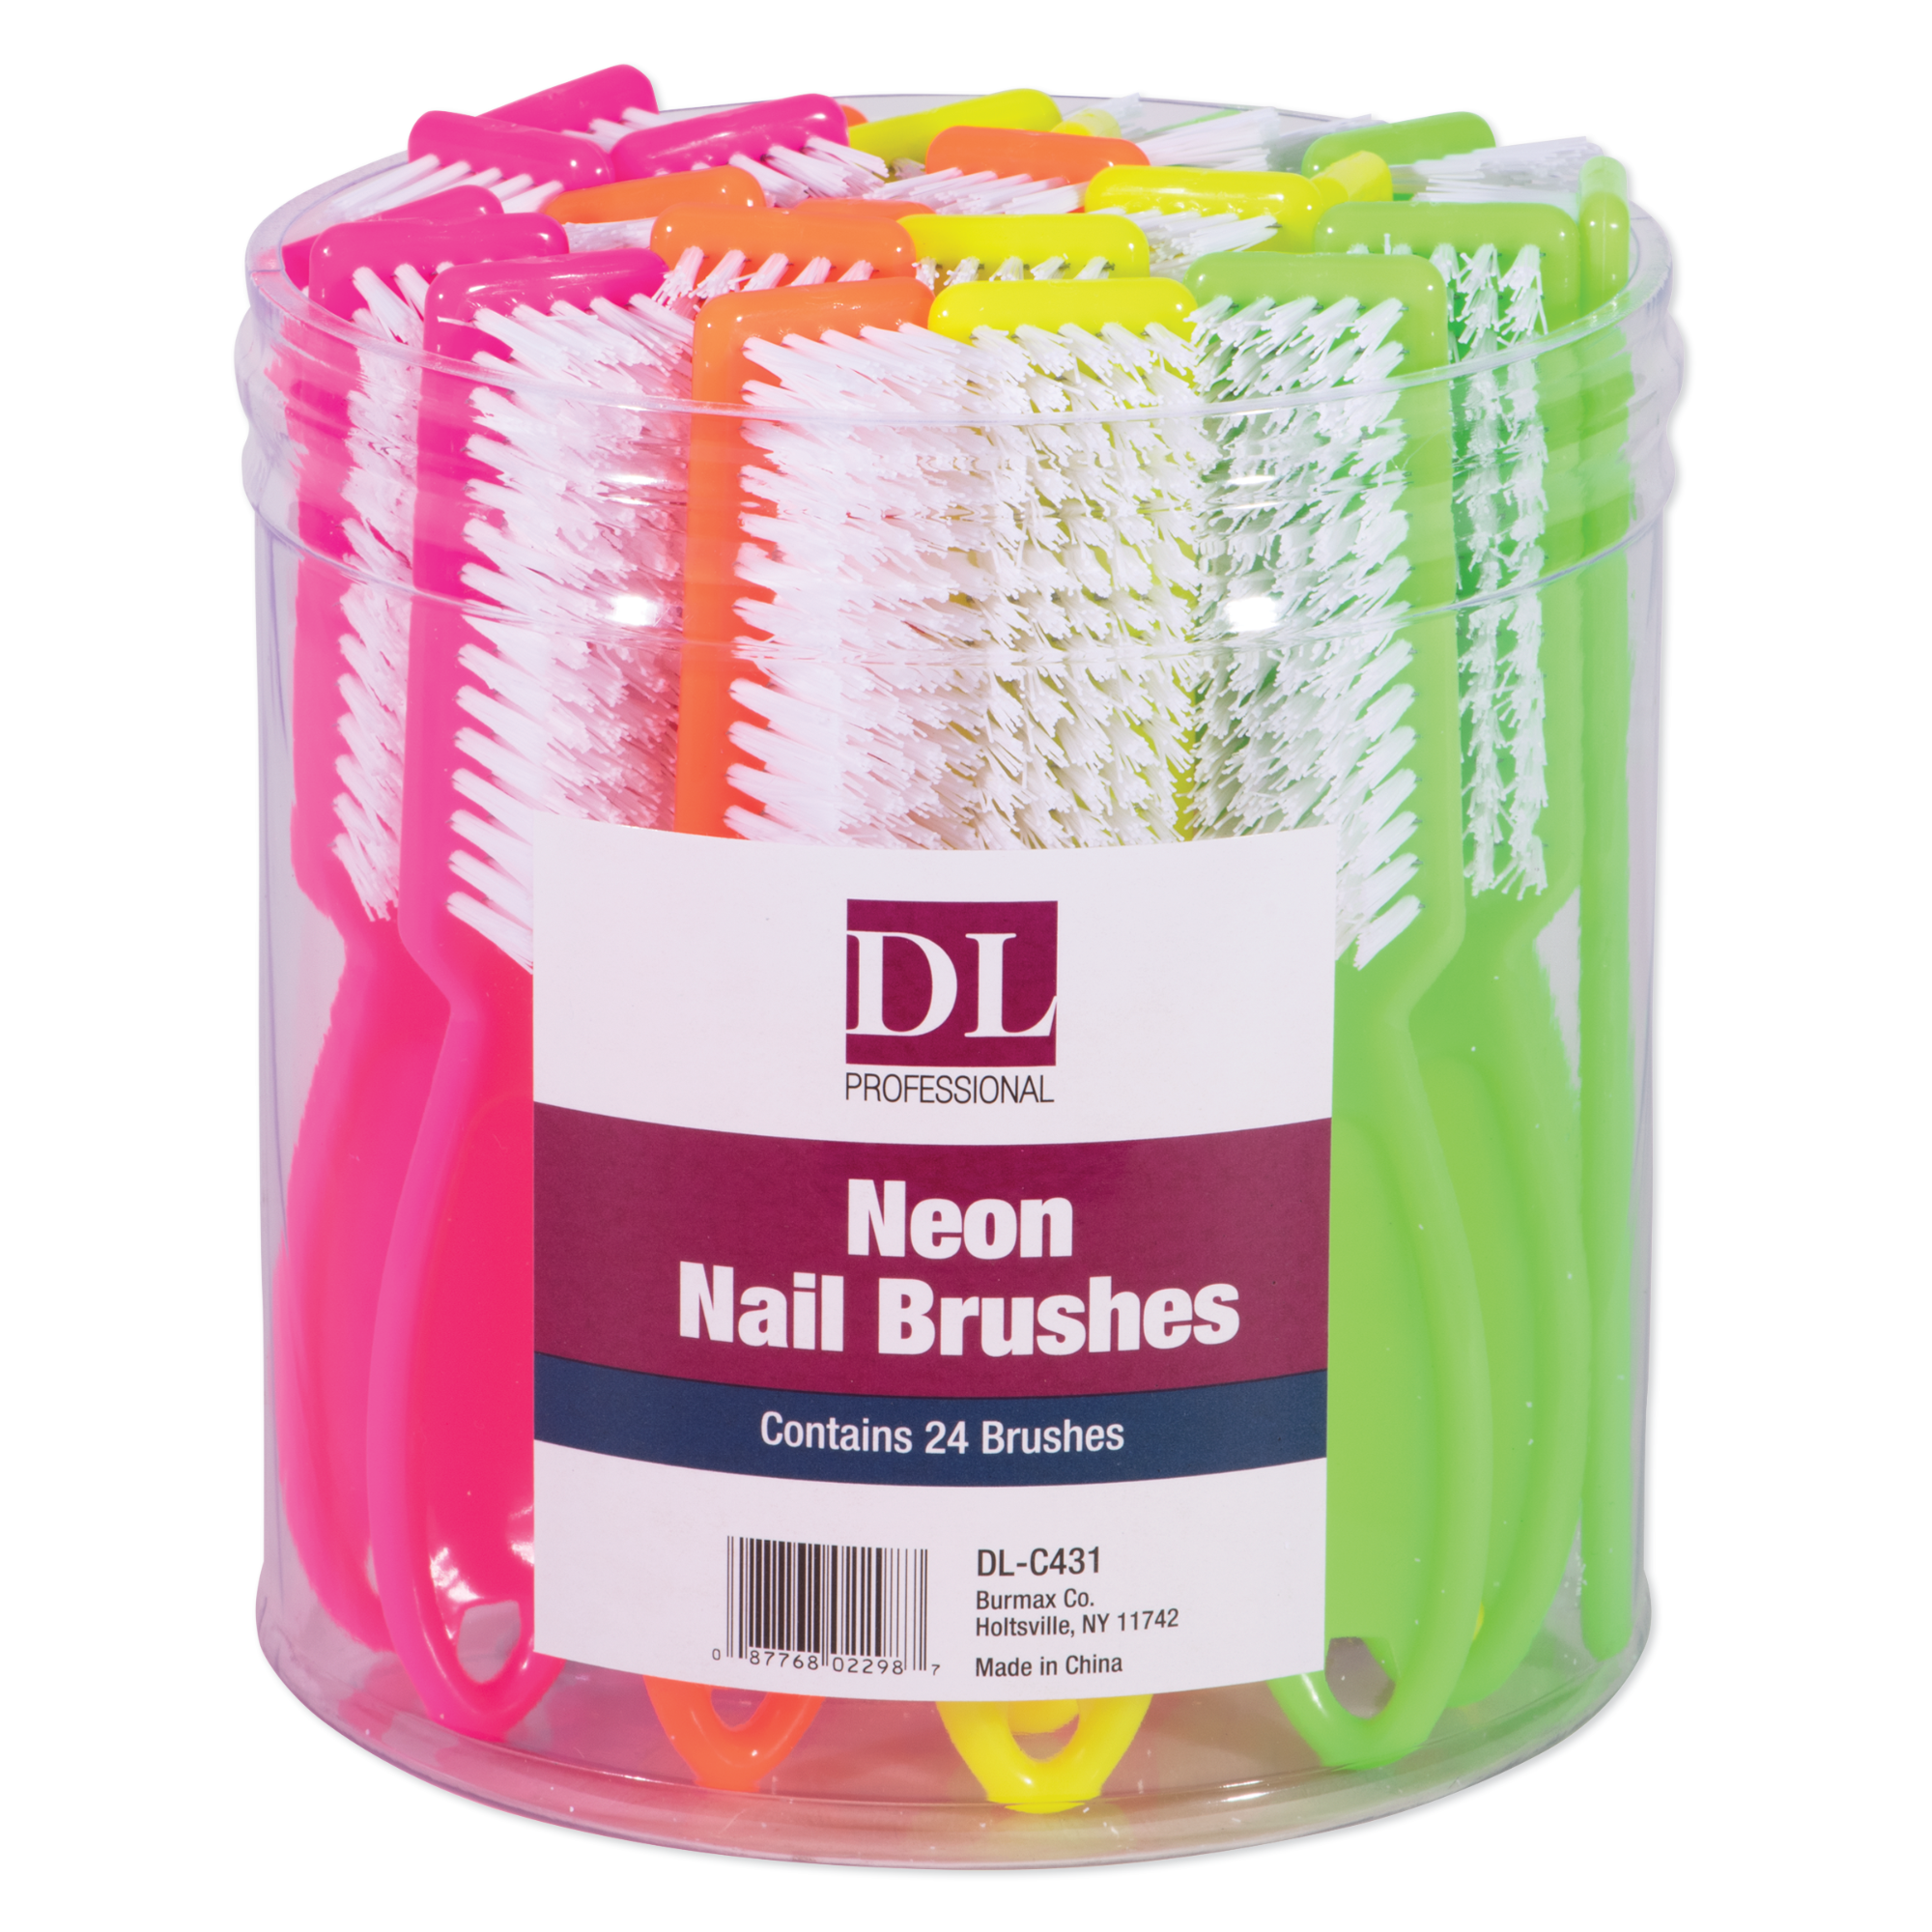 Manicure Brushes in a Container - Neon